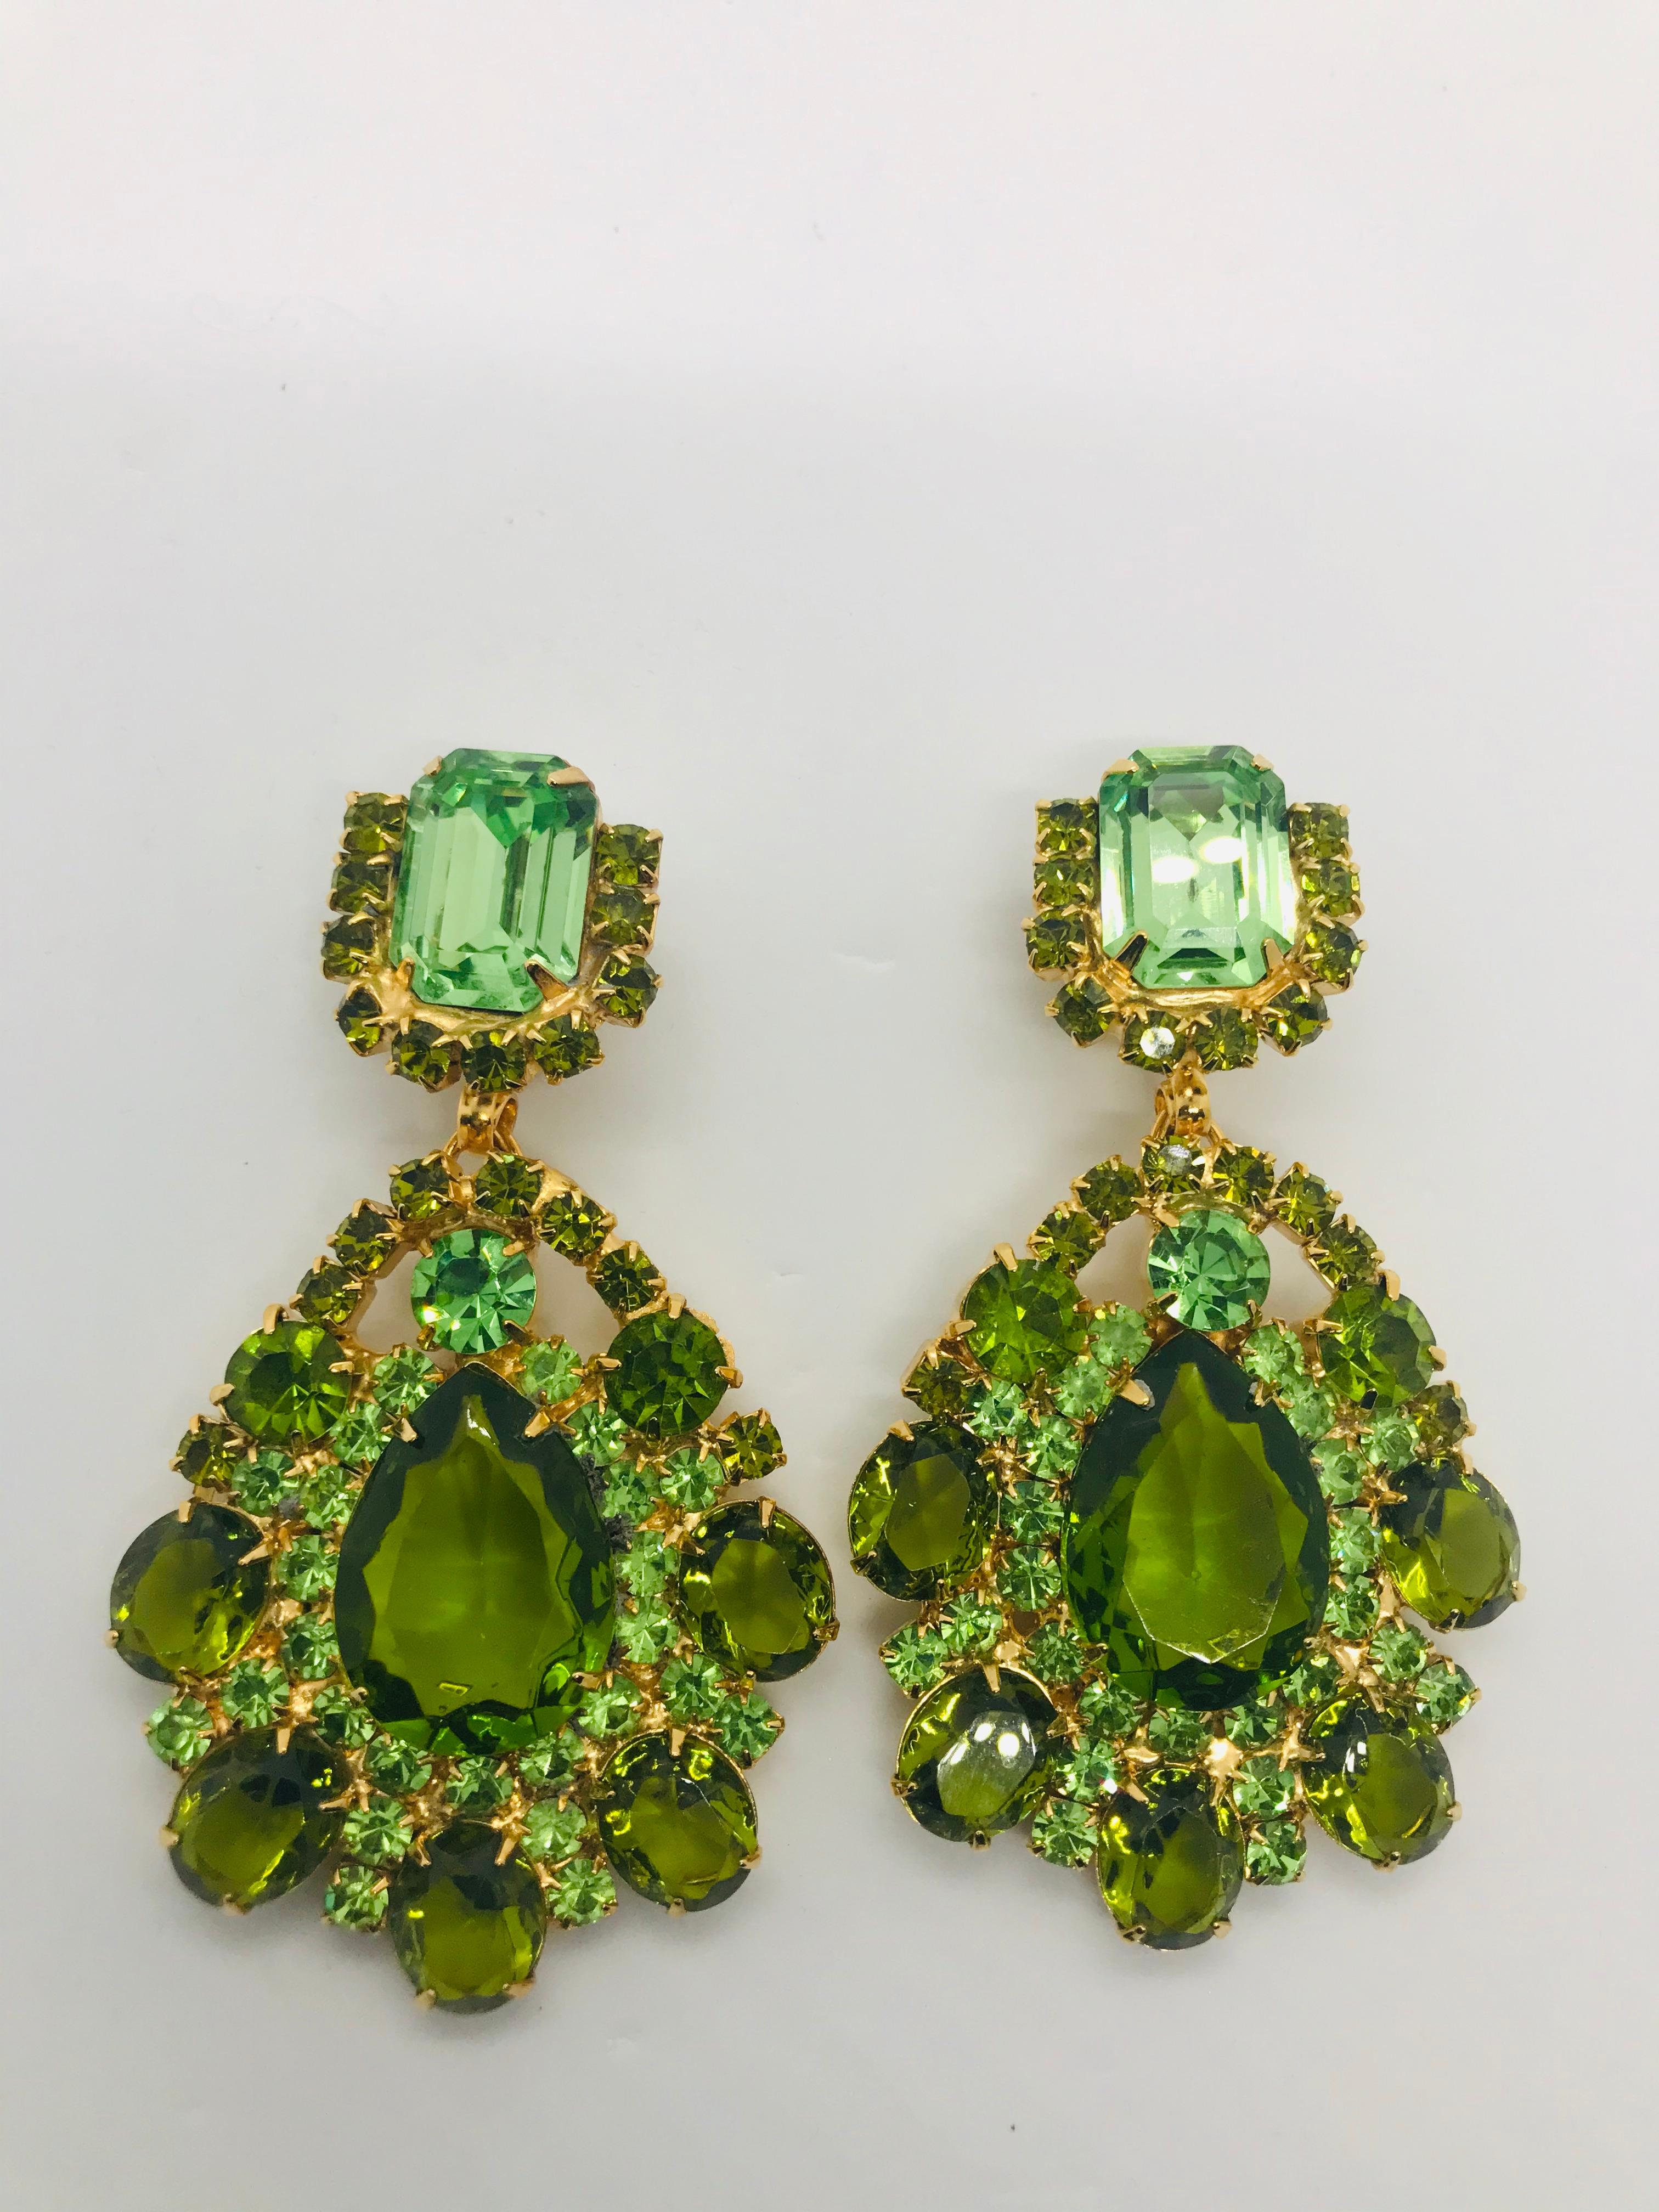 These bold colour saturated peridot and olivine Austrian crystal pendant drop earrings will add a pop of colour to any outfit, whether dressy or casual!  The earring drops feature large, dense olivine coloured 1950s Czech unfoiled pear shape stones.